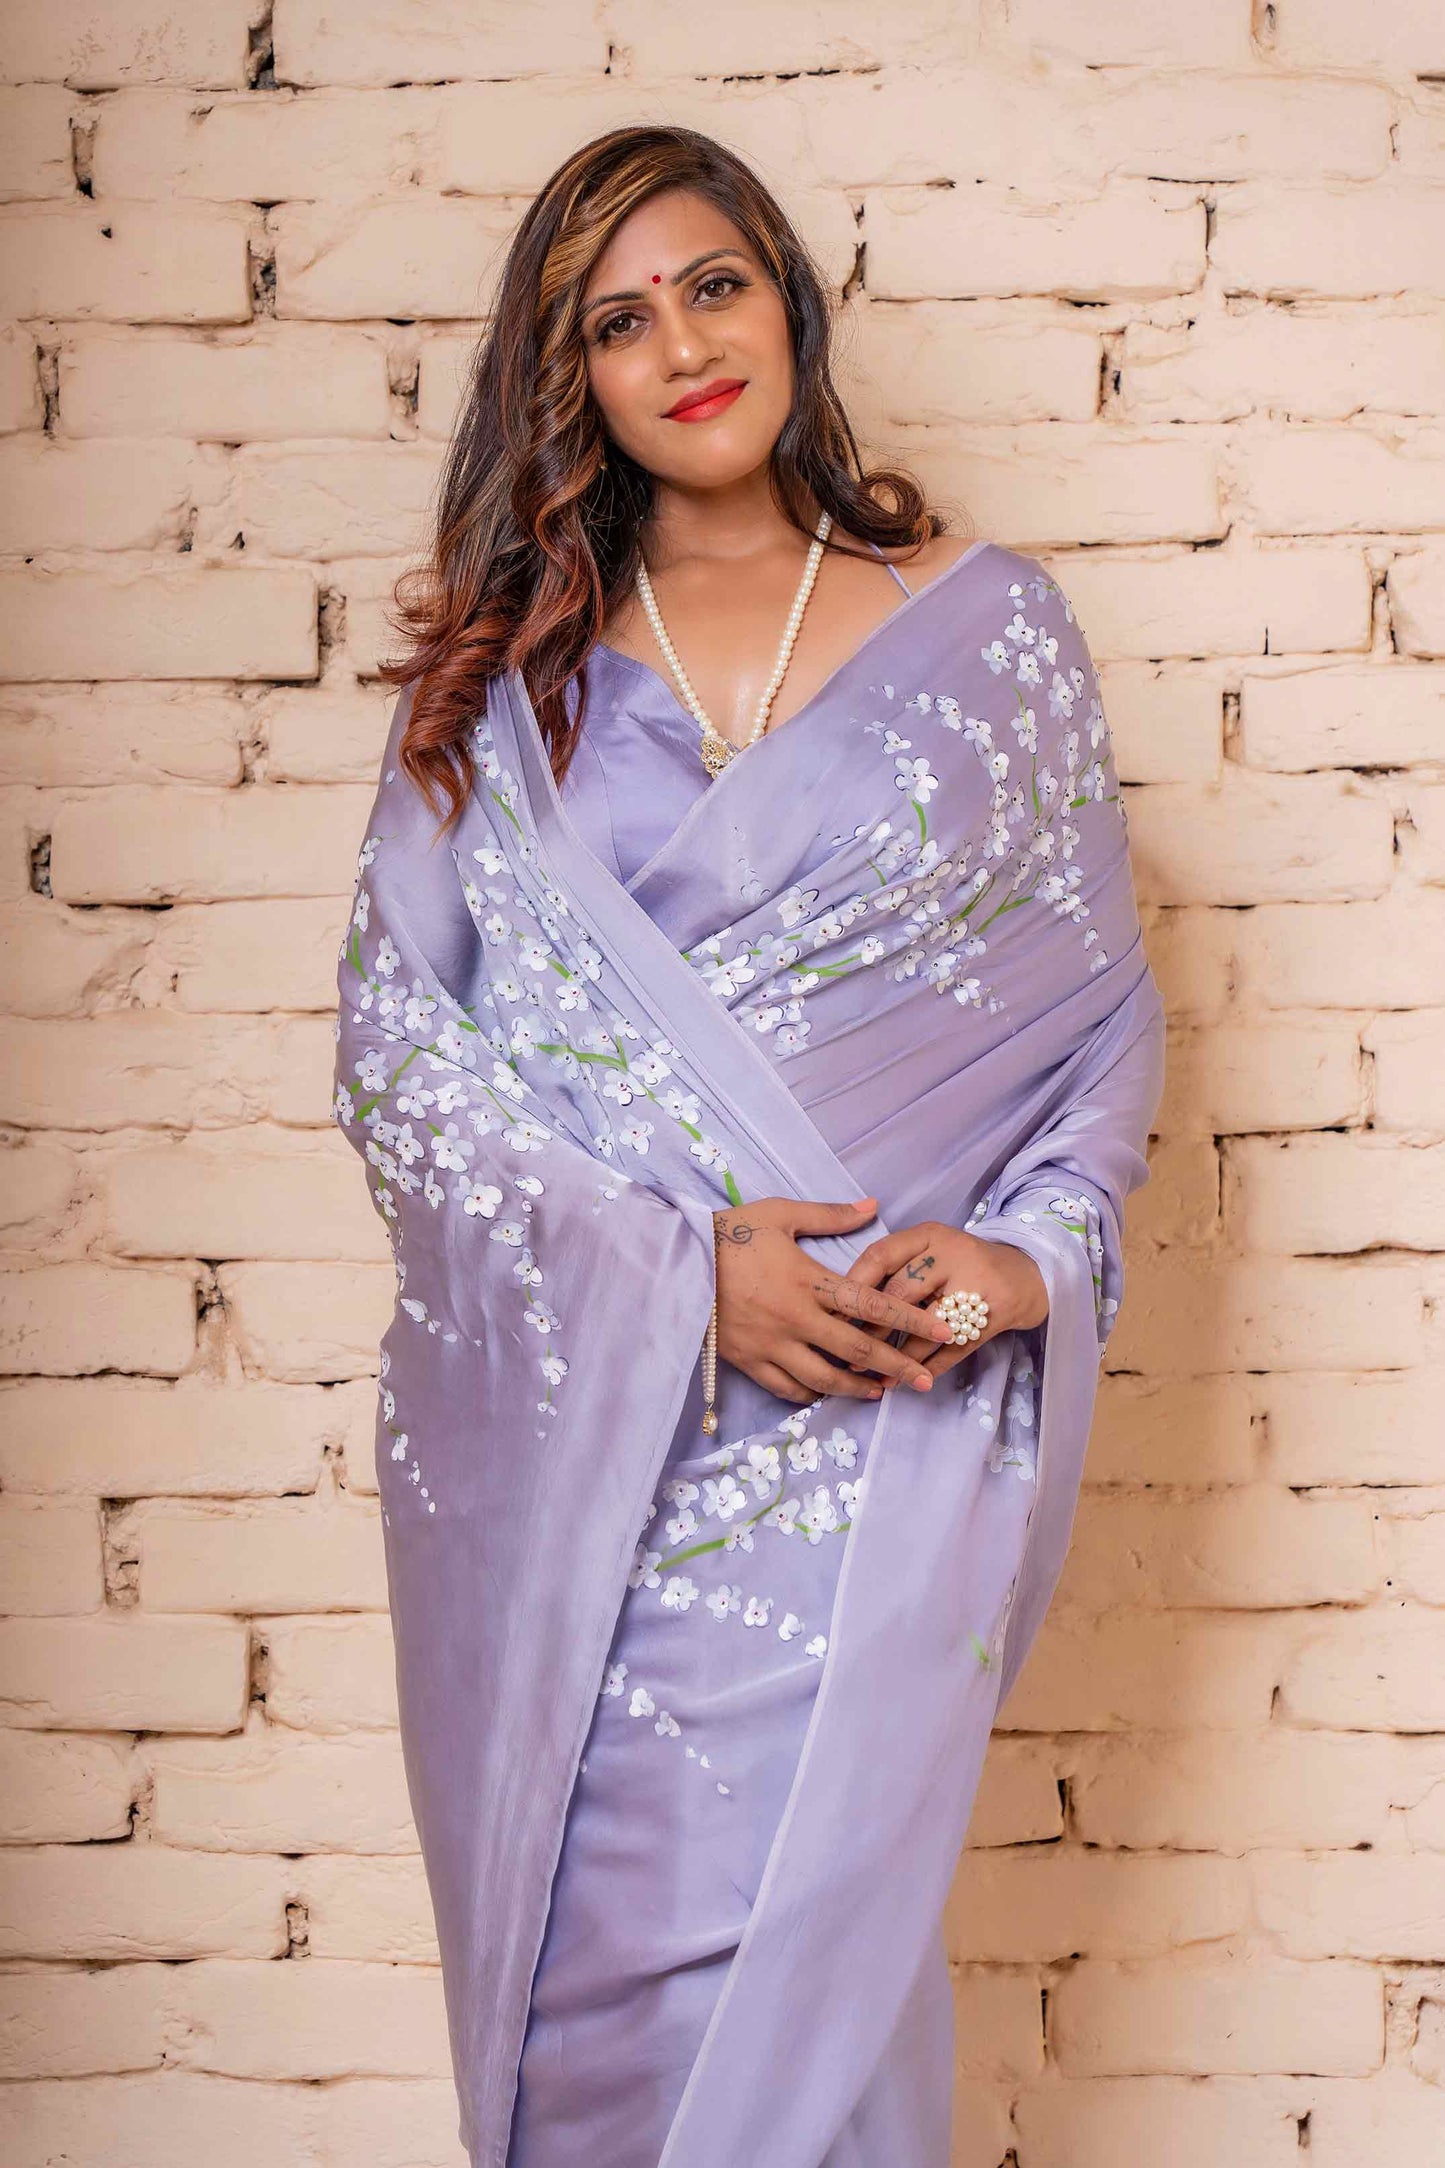 Lavender Satin Silk Saree Hand-Painted with White Apple Blossoms and Sequin Hand Embroidery - Perfect for Party Wear. Explore the Elegance of Hand-Painted Floral Sarees and Unique Saree Designs. Achieve a Hot Saree Style with This Pure Silk Saree. Ideal for an Engagement Look in Saree or a Farewell Saree Look. Discover Easy Hand-Painted Saree Design with Intricate Hand Painting. Elevate Your Saree Look for Weddings and Parties with This Beautiful and Stylish Indian Saree.